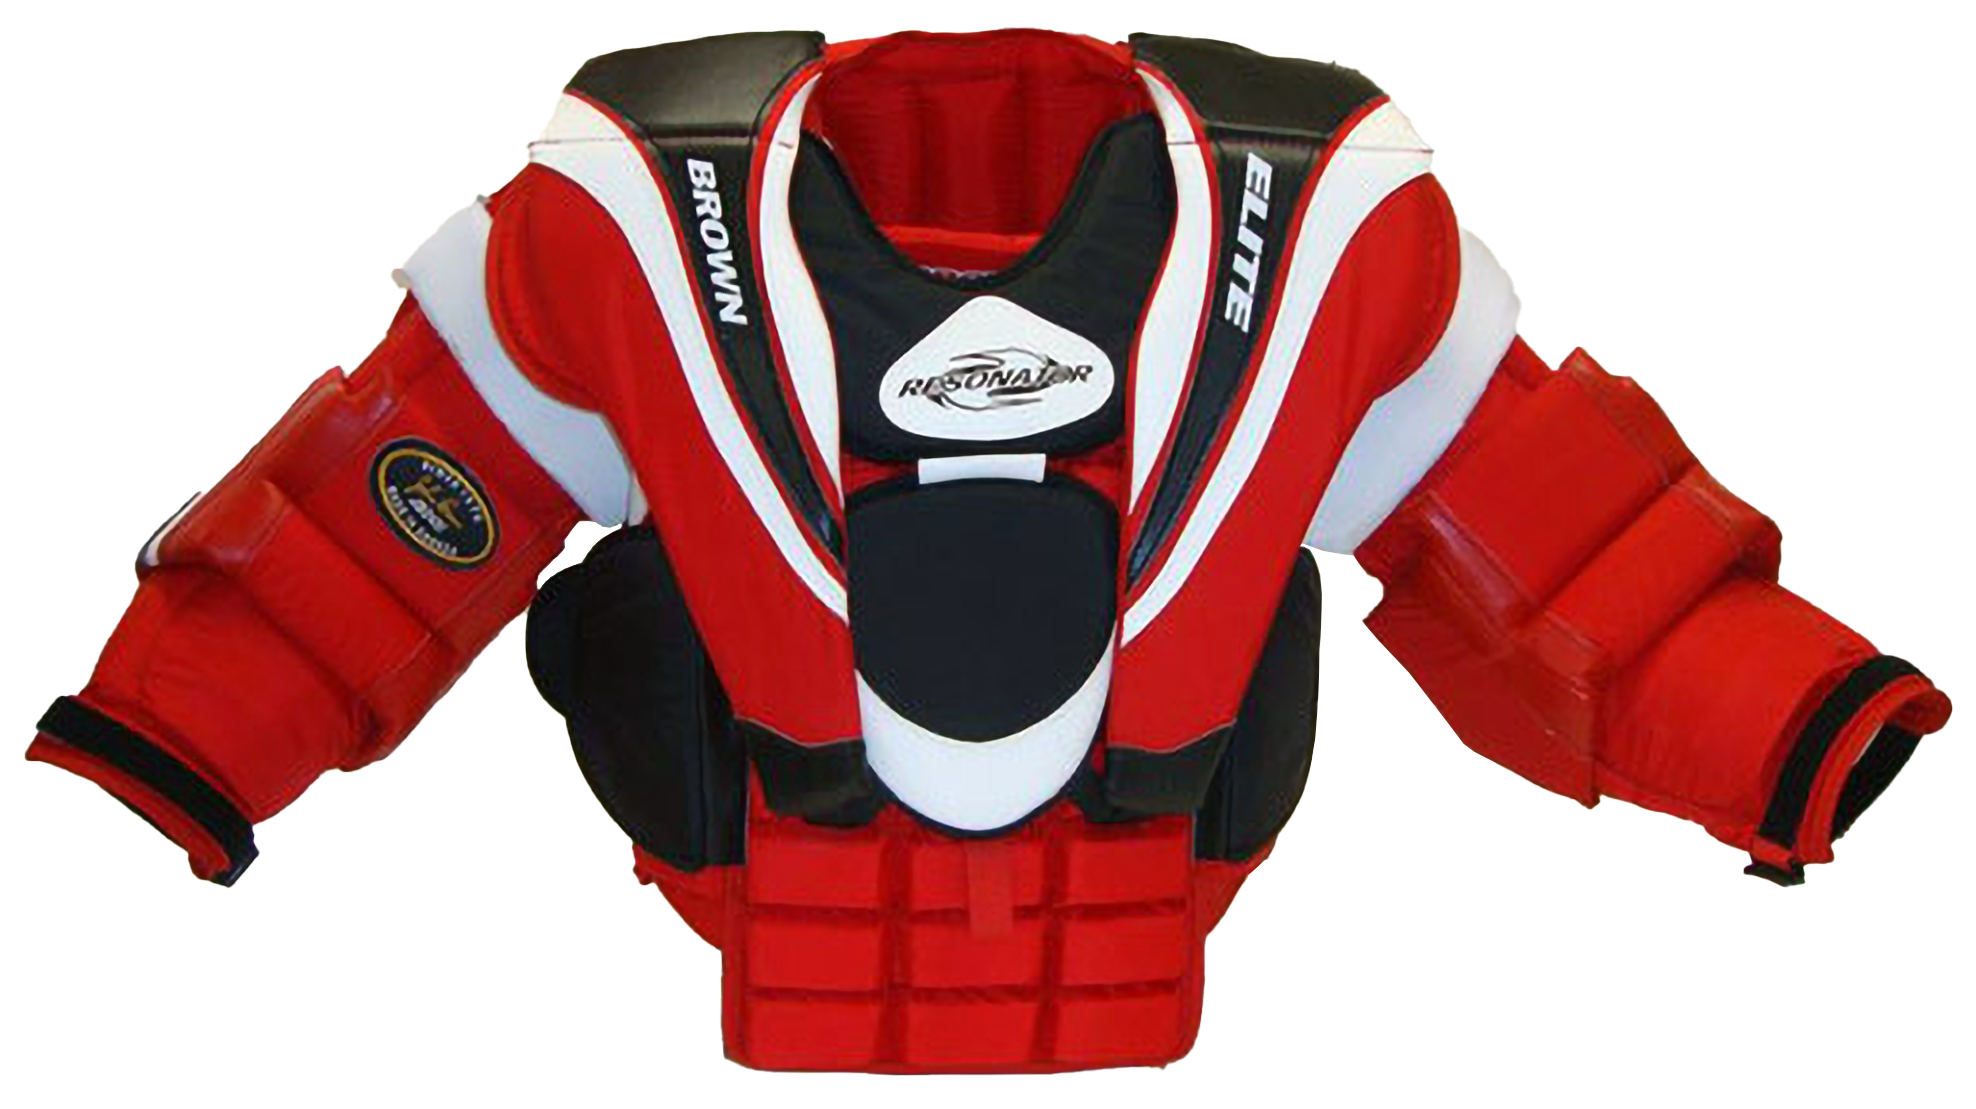 2400 red, black, and white chest protector